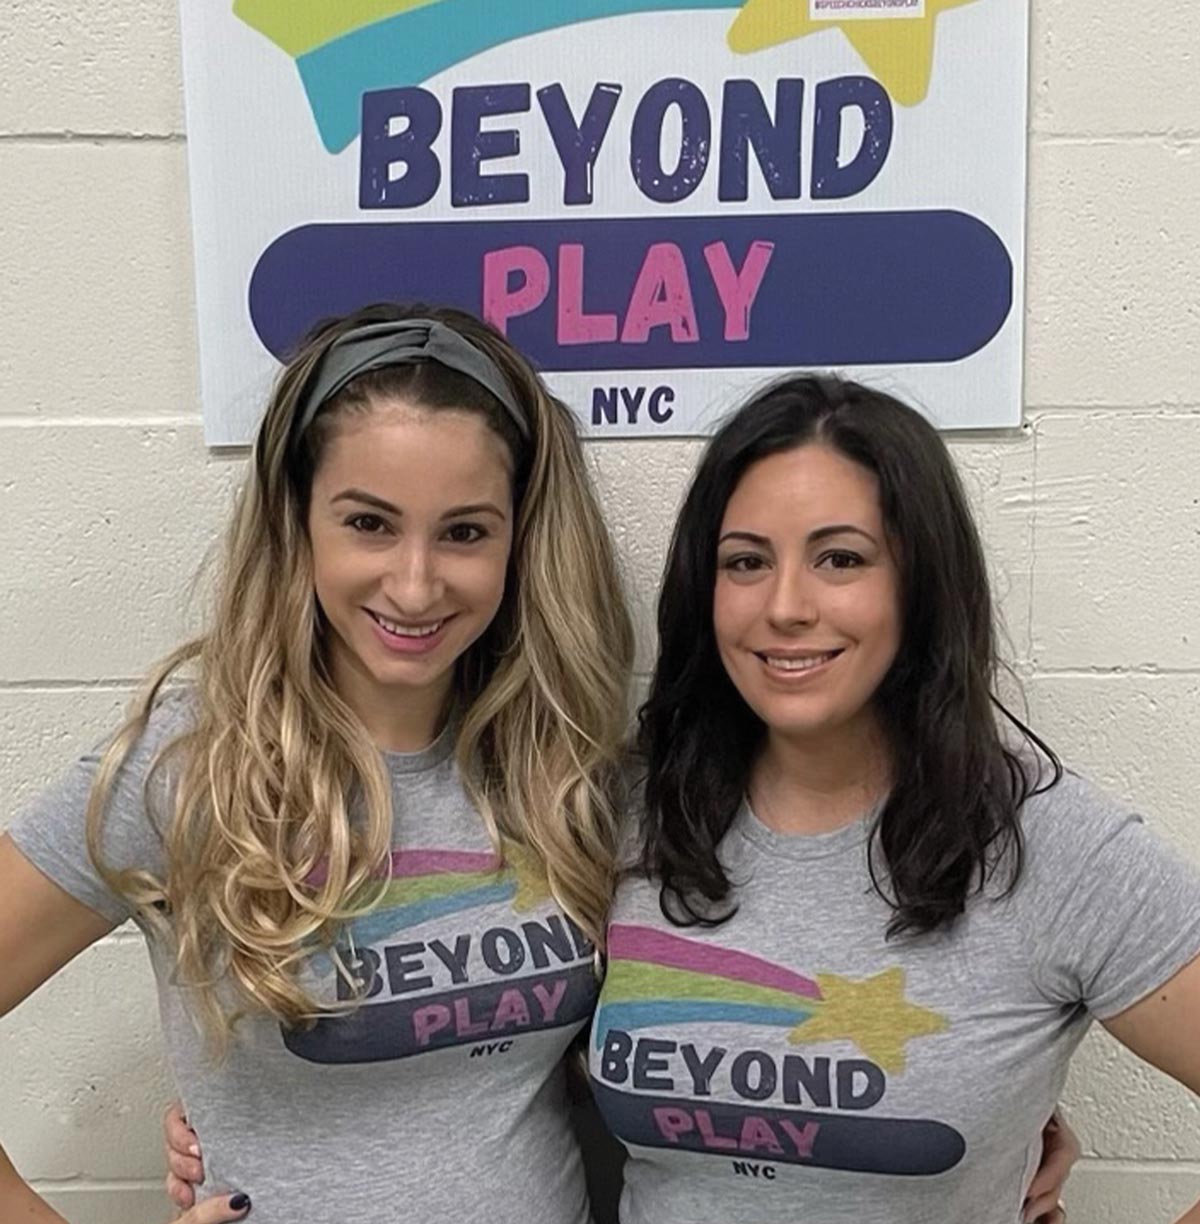 Madeline Romano ’09 and Mary Vitale ’10 stand together smiling and wearing "Beyond Play NYC"  while standing in front of a poster that reads "Beyond Play NYC"